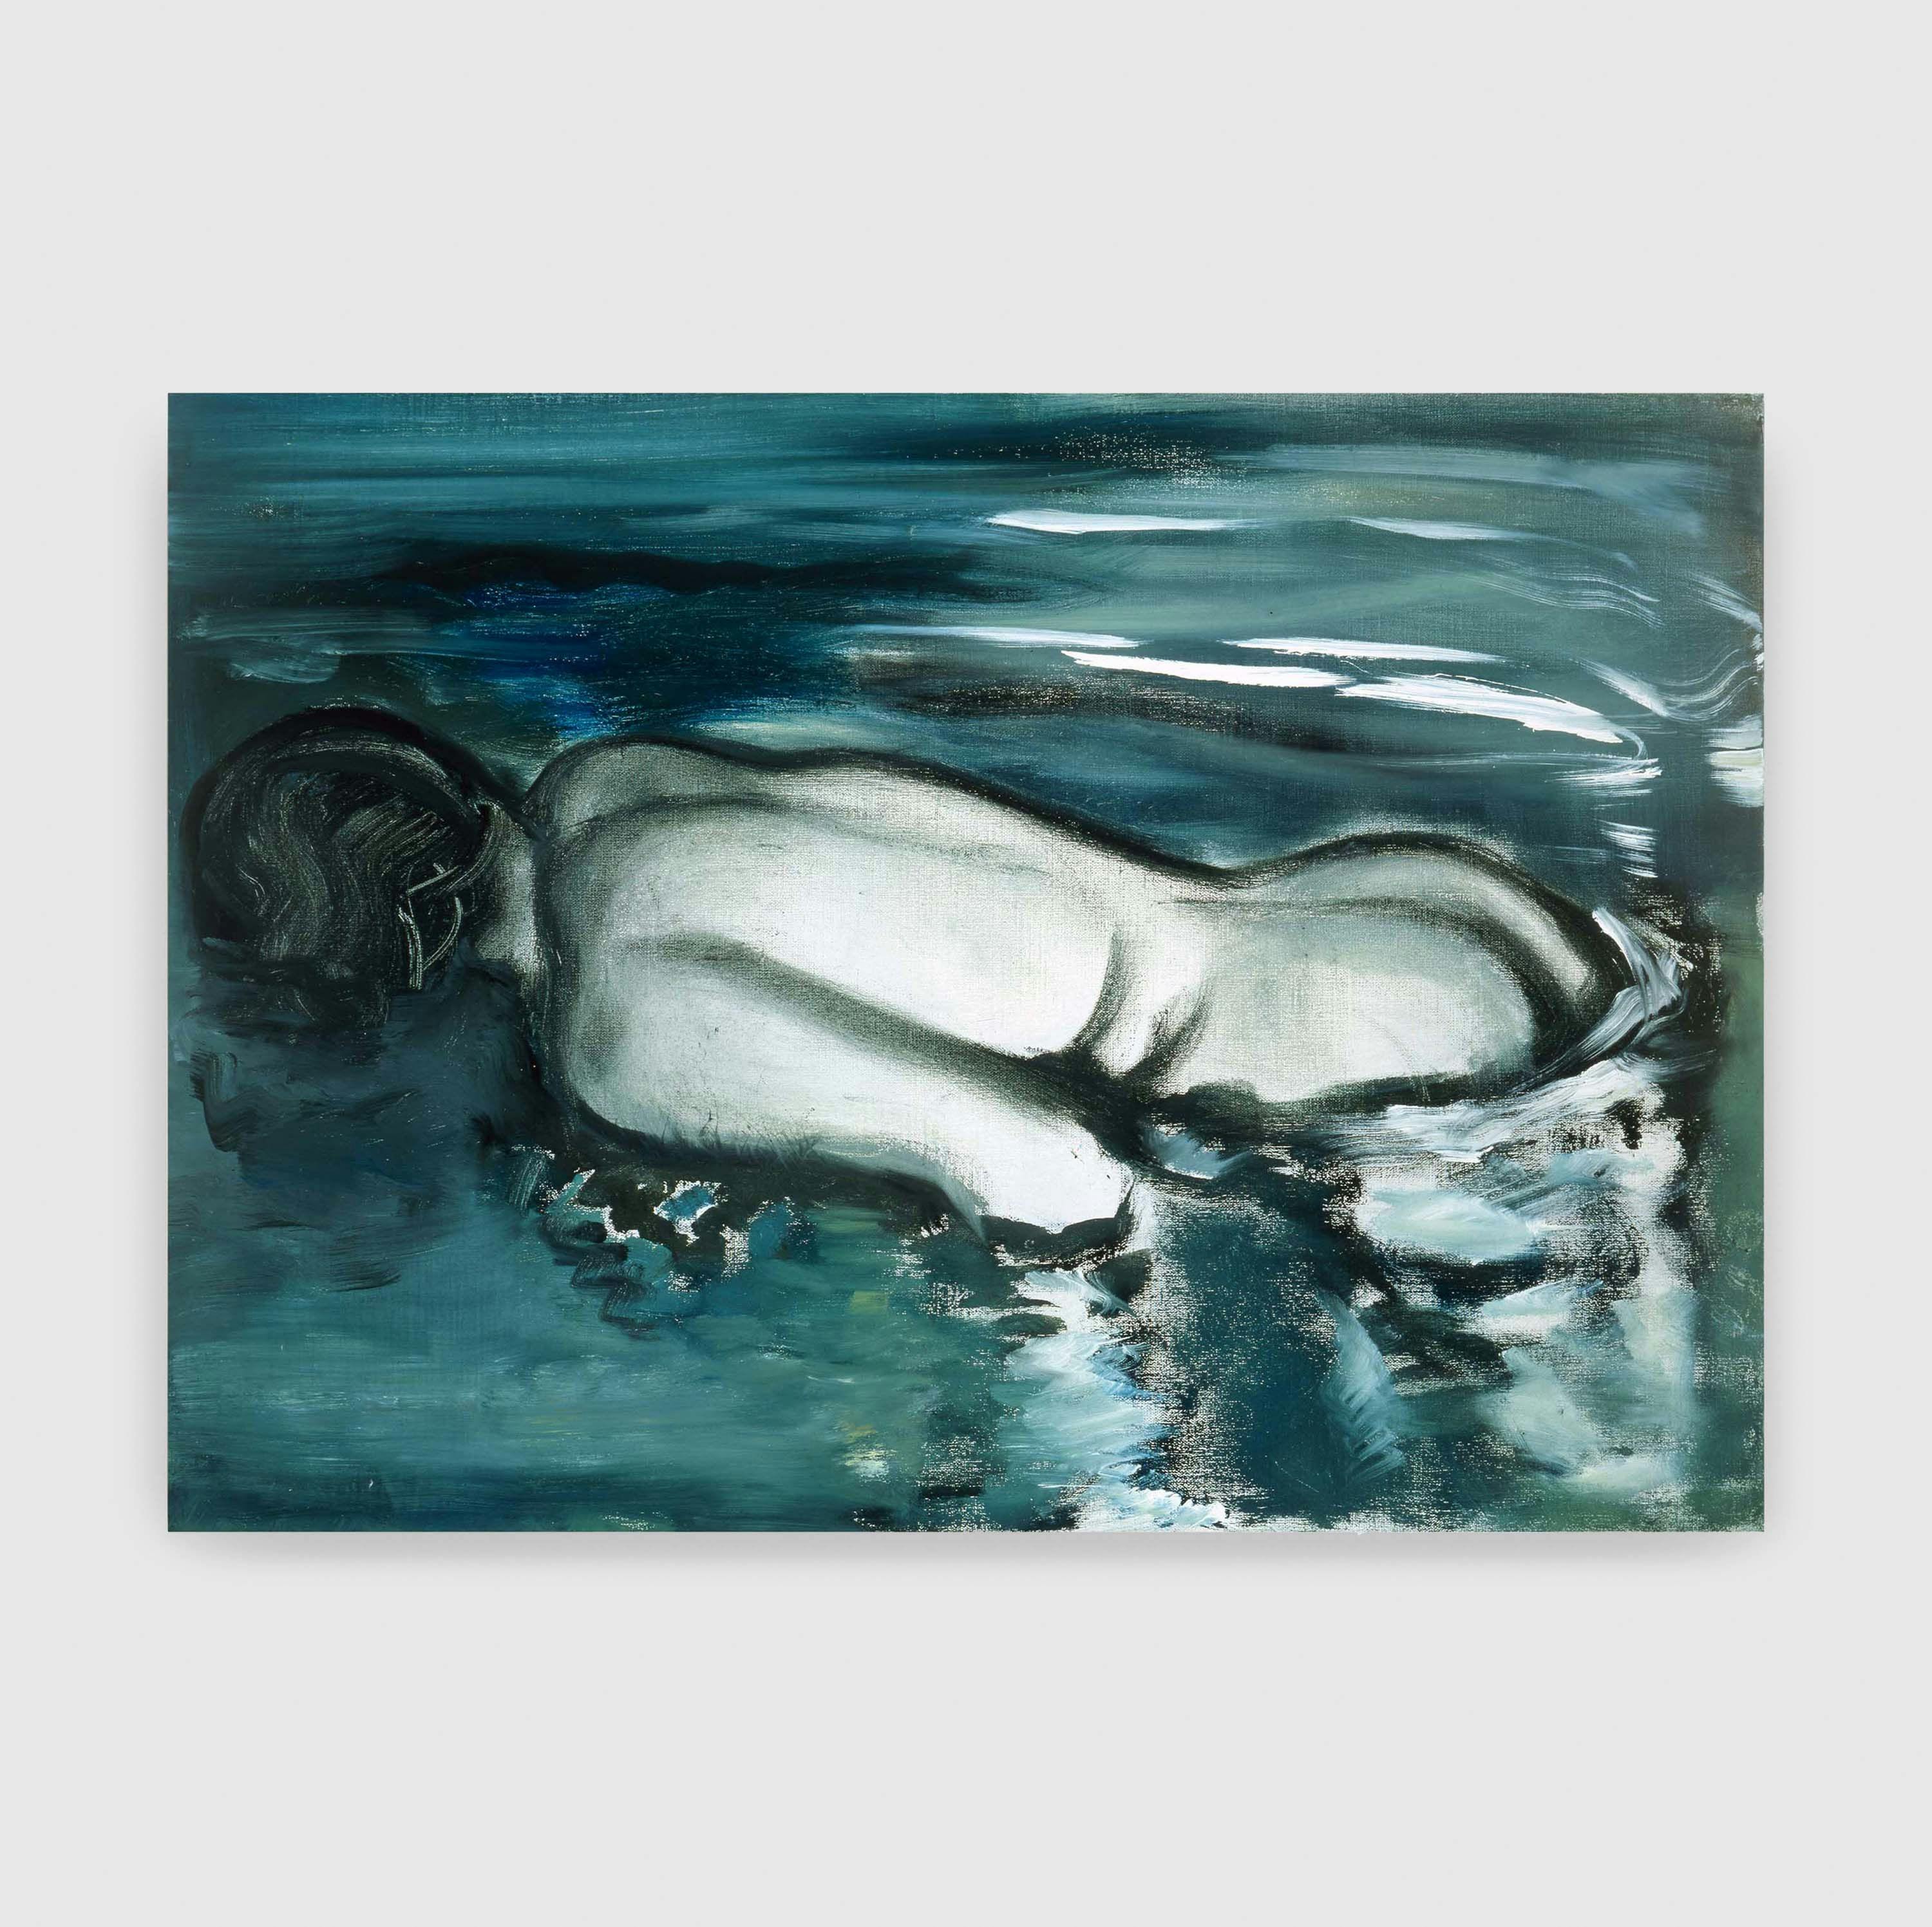 A painting by Marlene Dumas, titled Losing (Her Meaning), dated 1988.